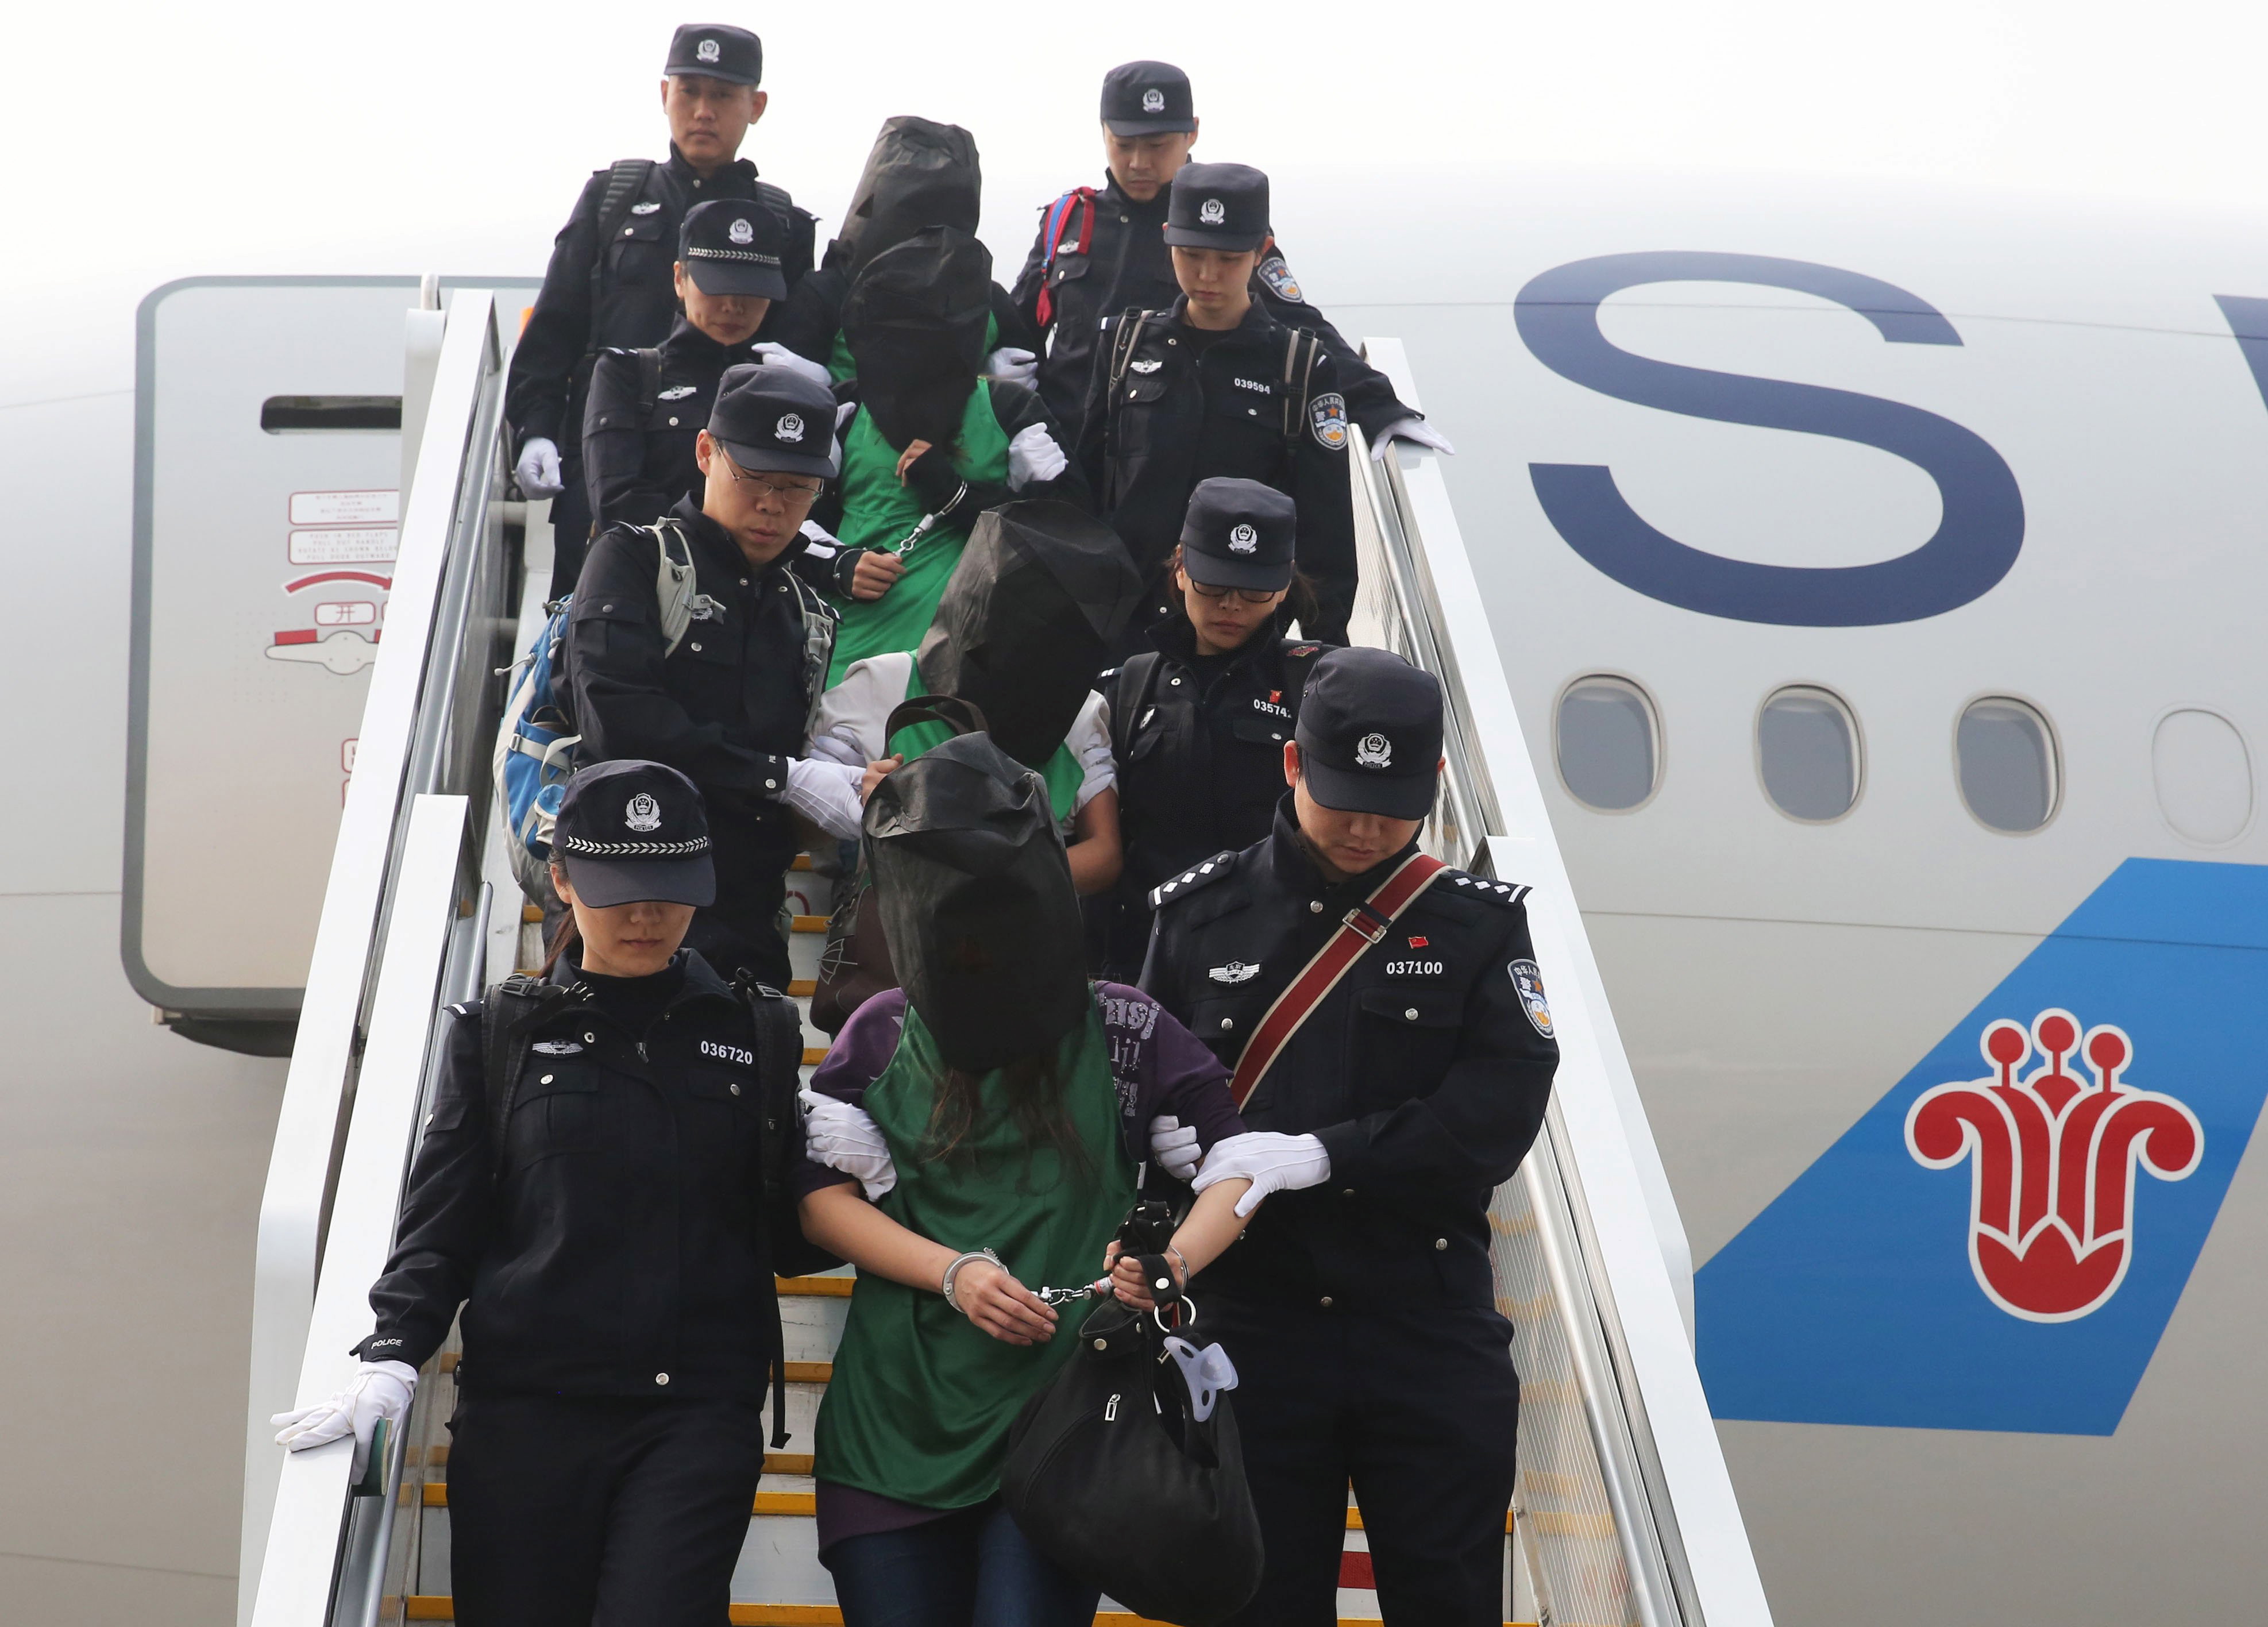 Police escort a group of people wanted for suspected fraud in China, after they were deported from Kenya, as they get off a plane after arriving at Beijing Capital International Airport in Beijing, China